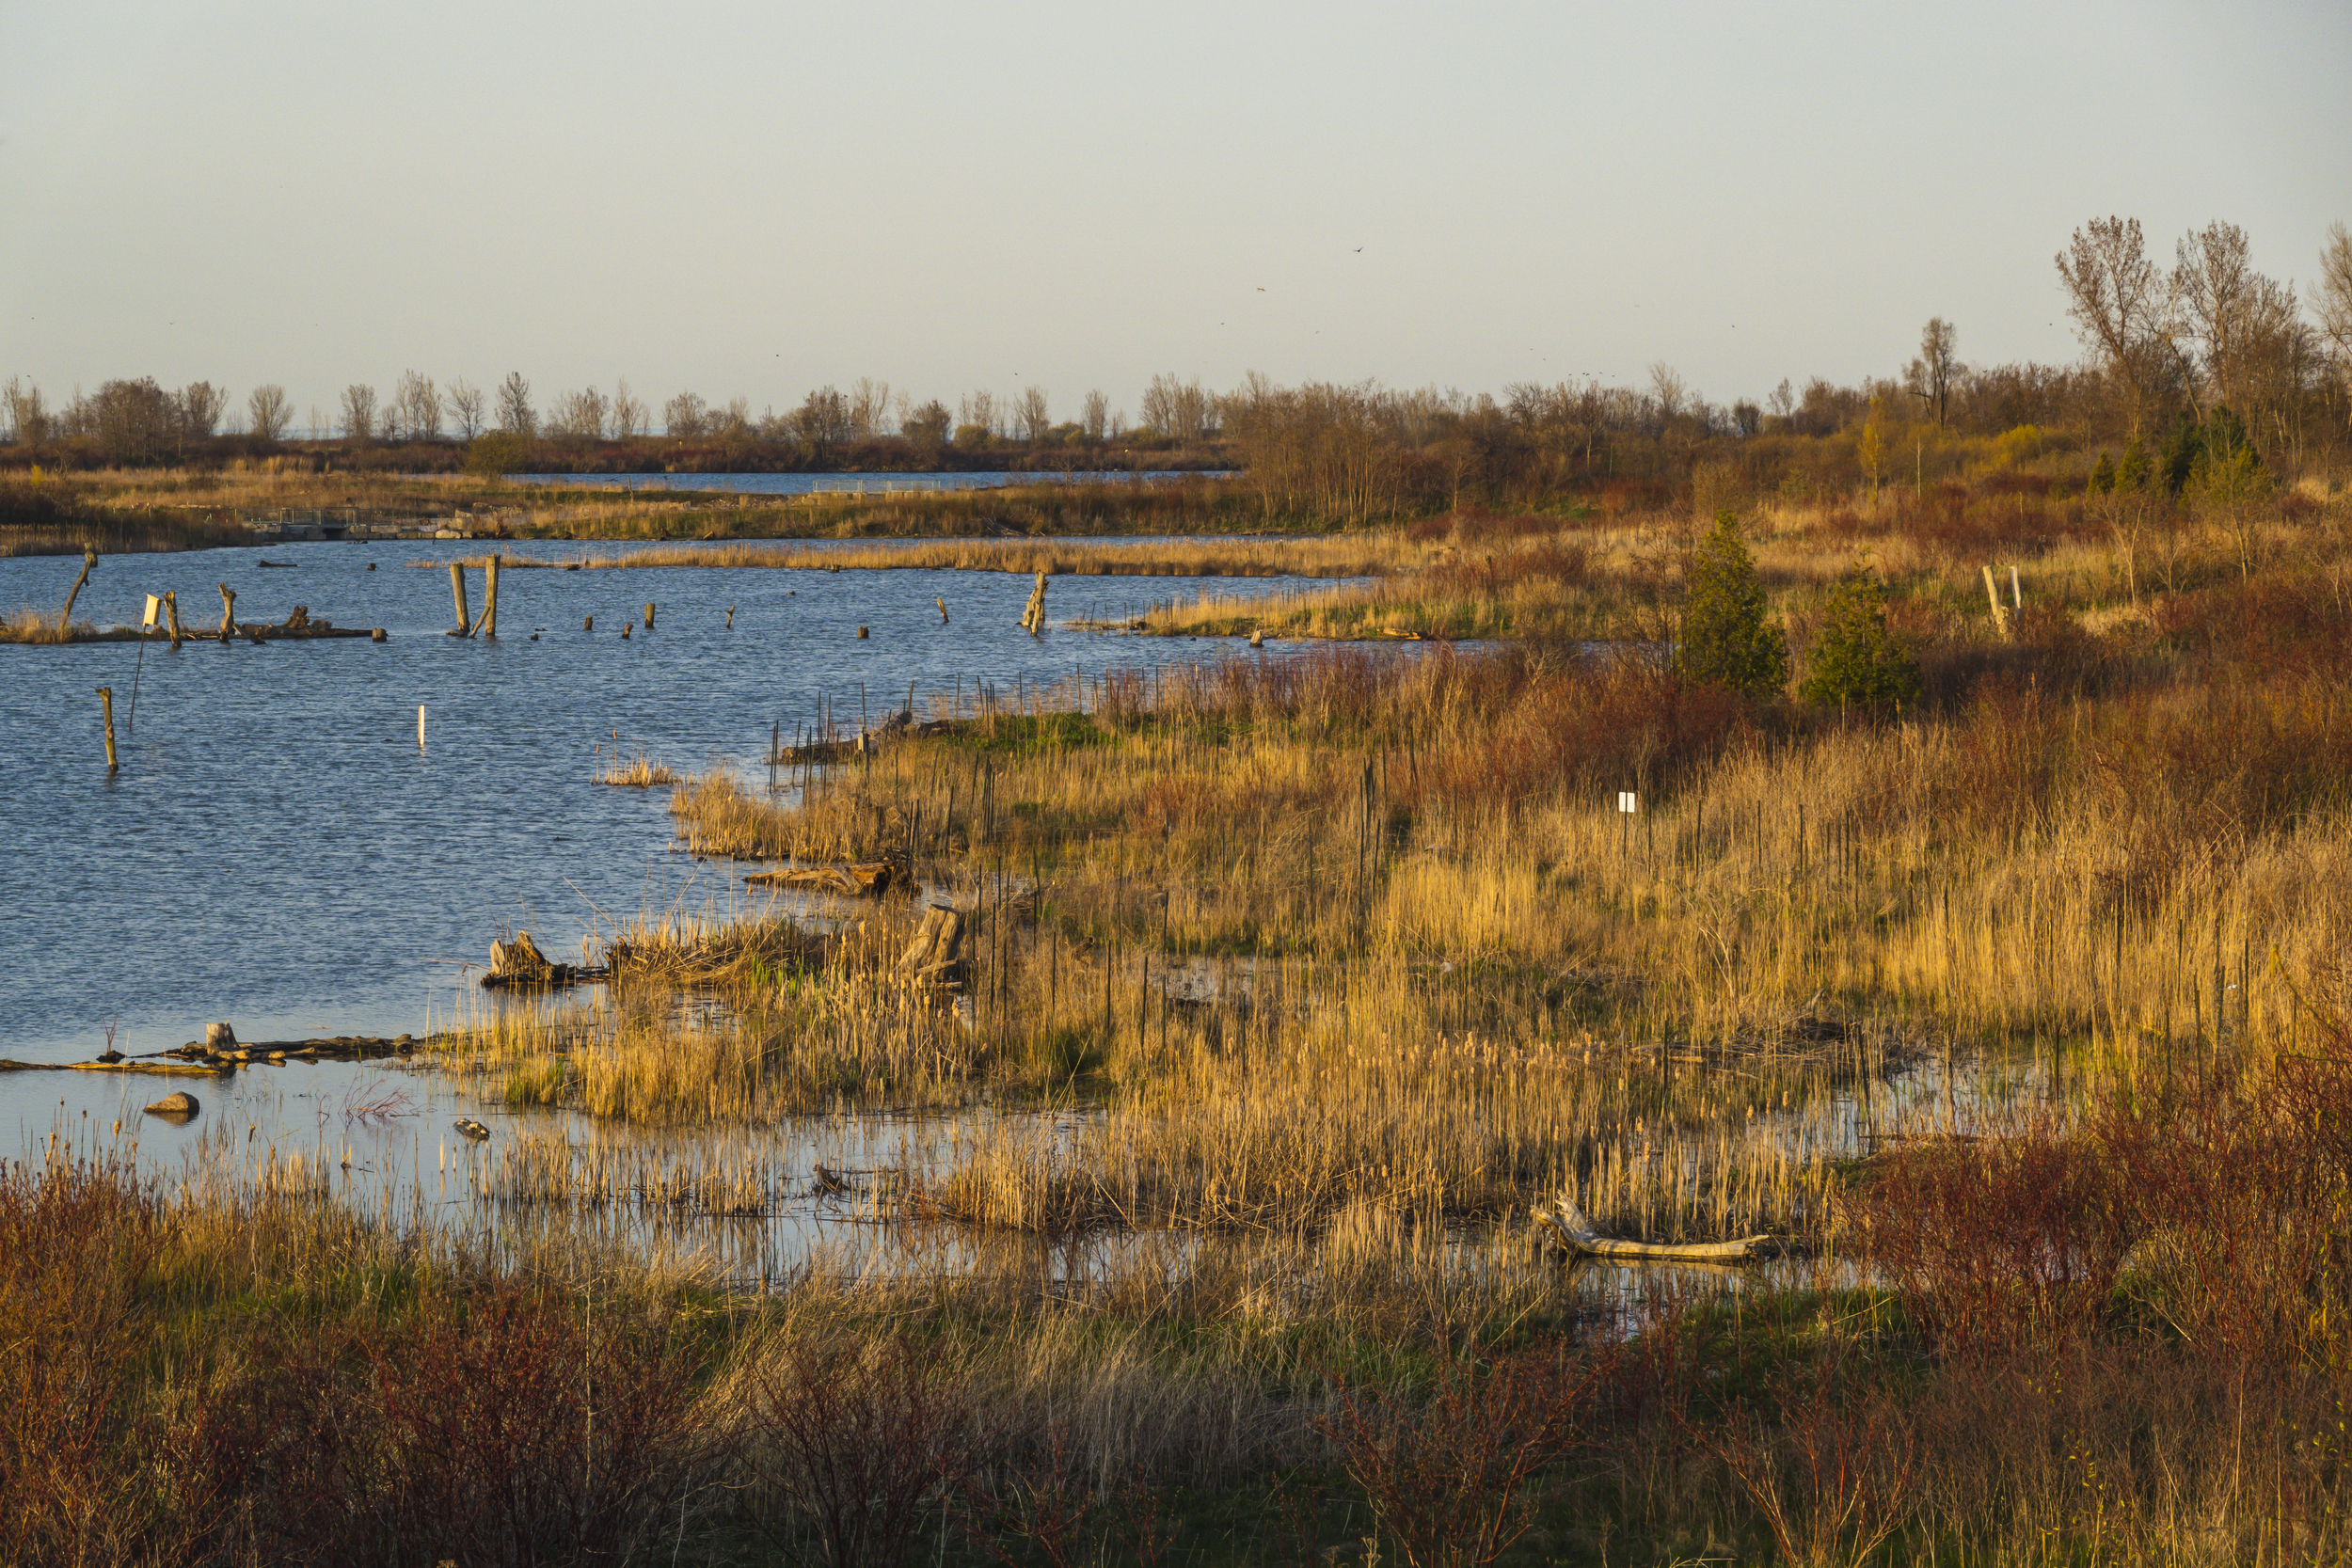 A wetland with water, logs sticking out upright and golden grasses along the shore at Tommy Thompson Park.